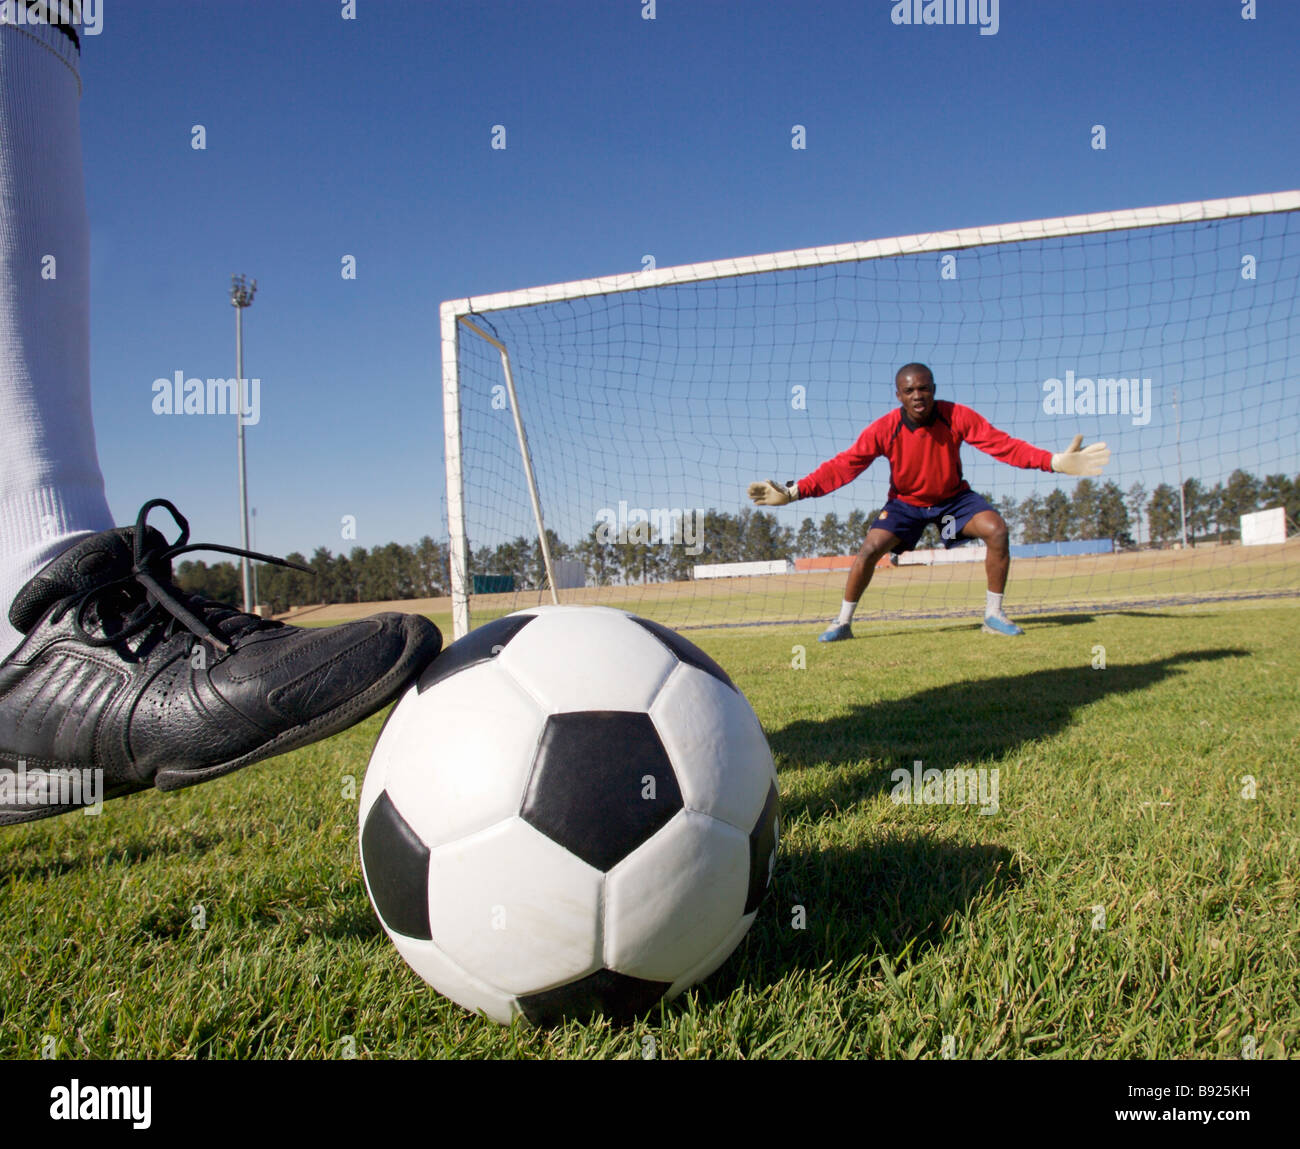 Soccer player lining up his ball to kick a penalty shot Pretoria Gauteng Province South Africa Stock Photo